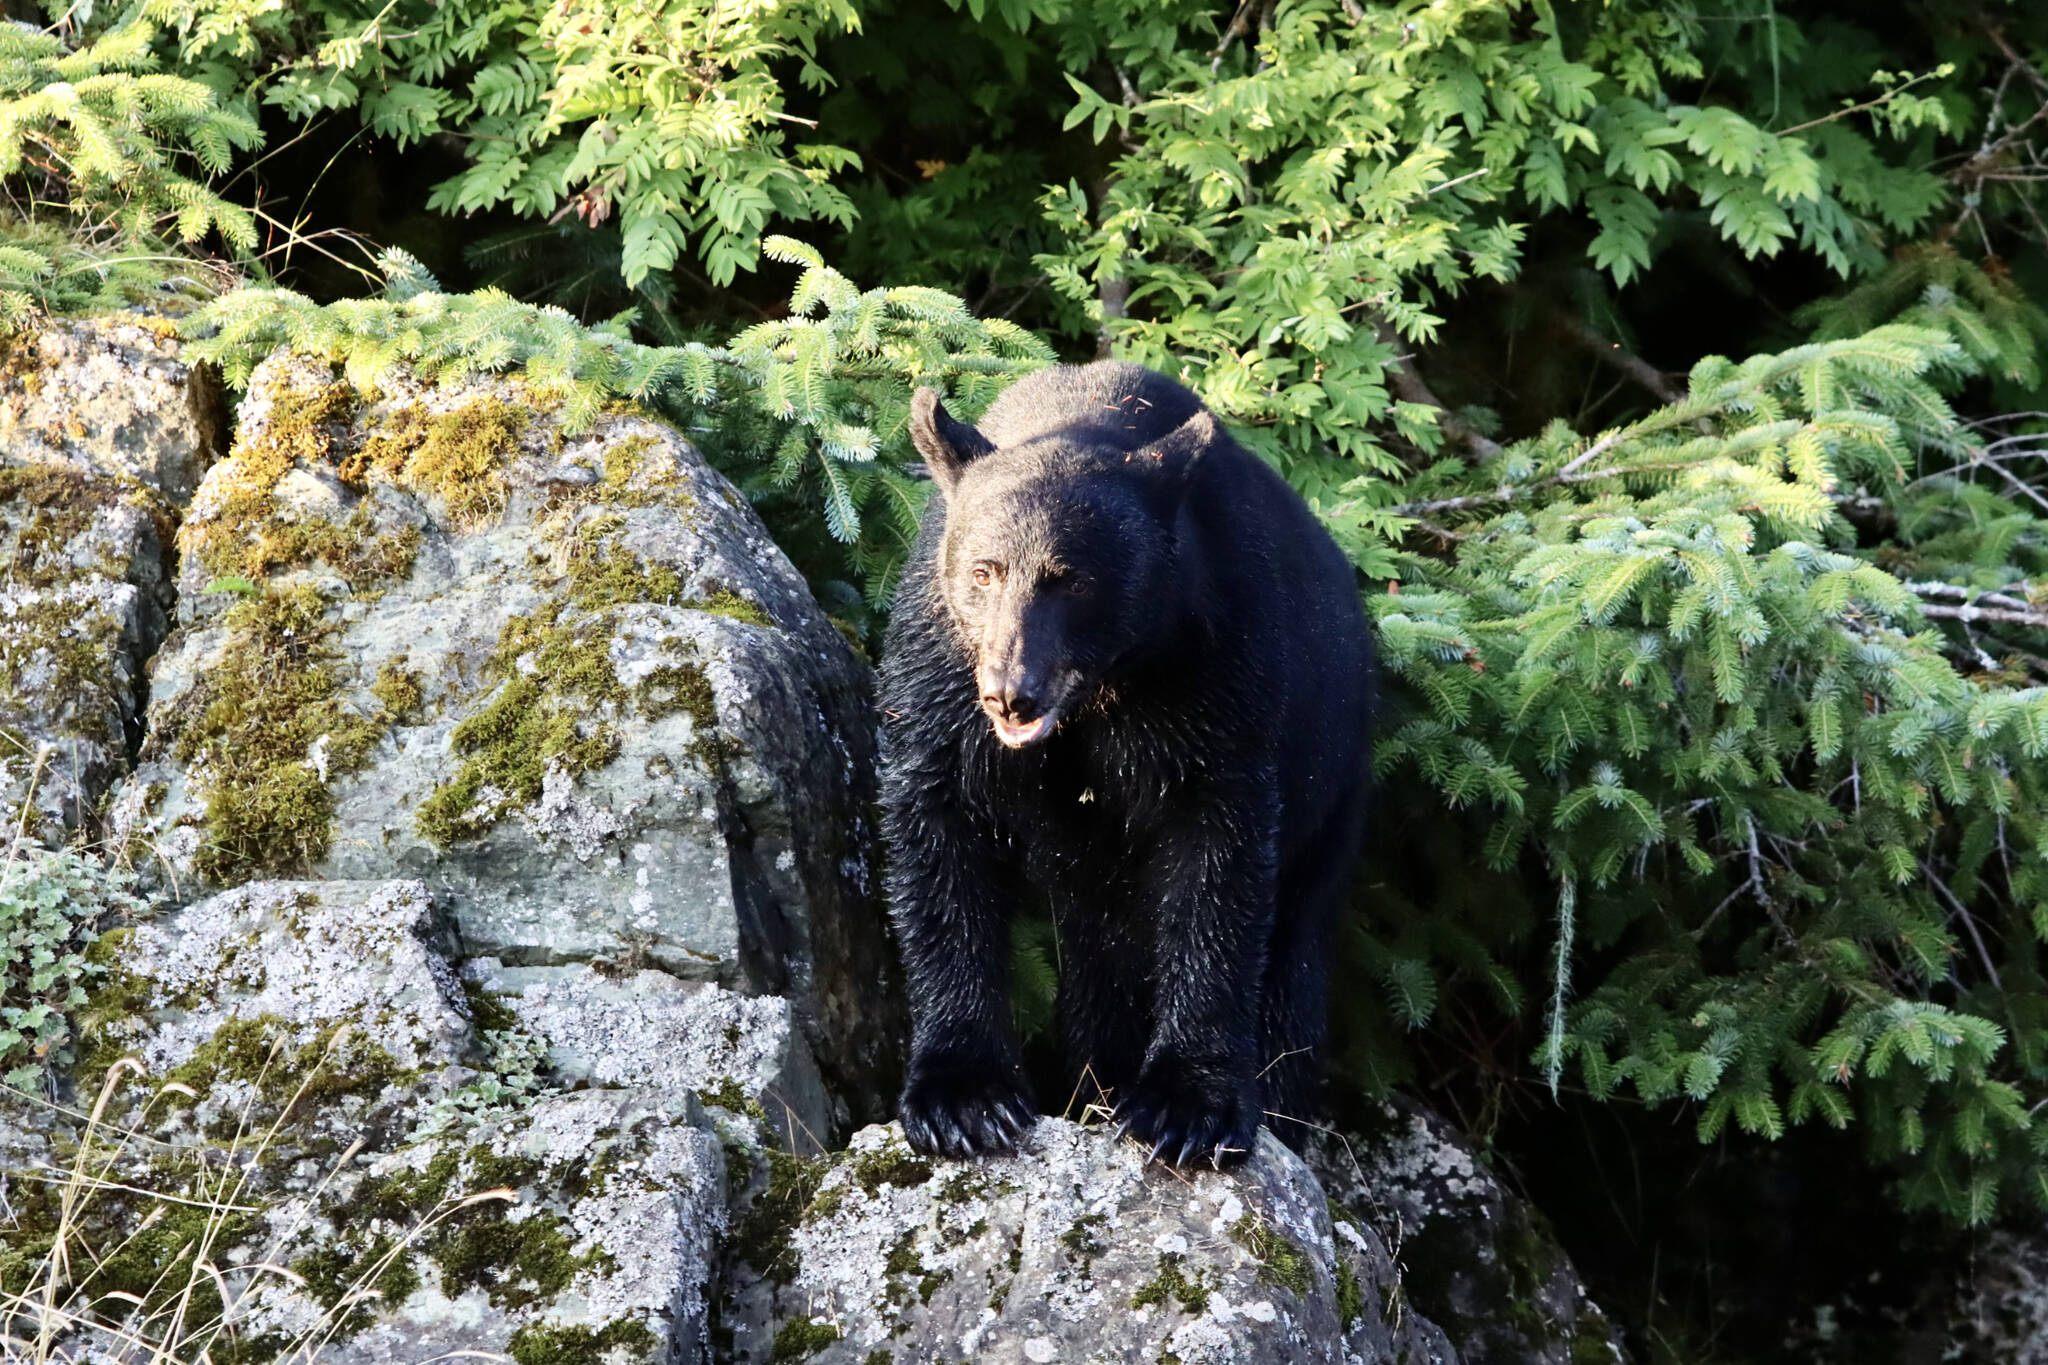 A bear hangs out on a rock during a sunny evening in the Amalga Harbor area in late July. (David Rigas / Juneau Empire)